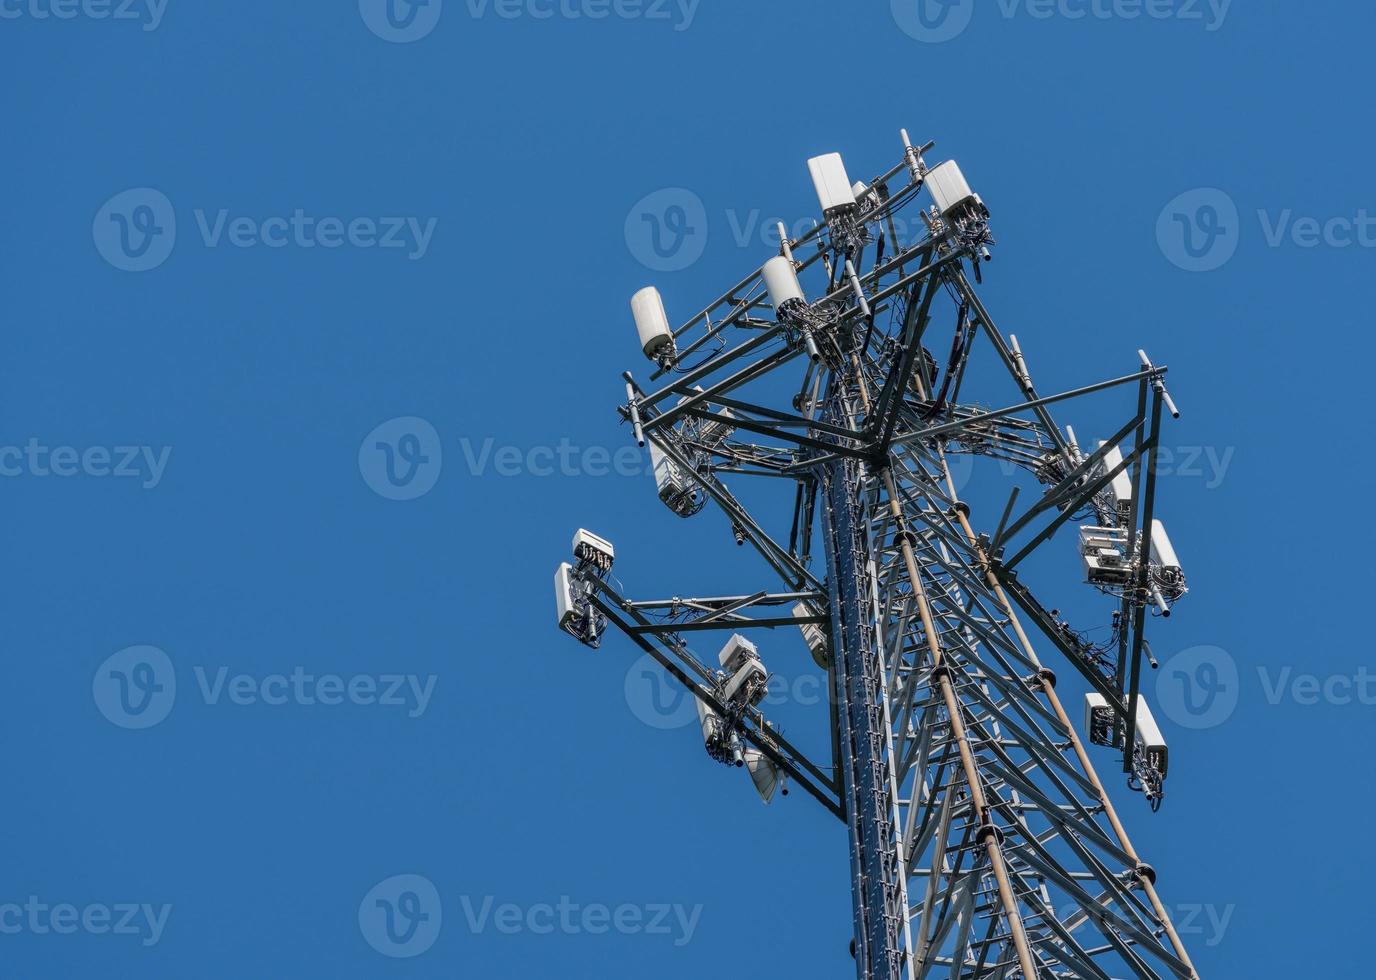 Cell phone or mobile service tower providing broadband internet service against blue sky photo